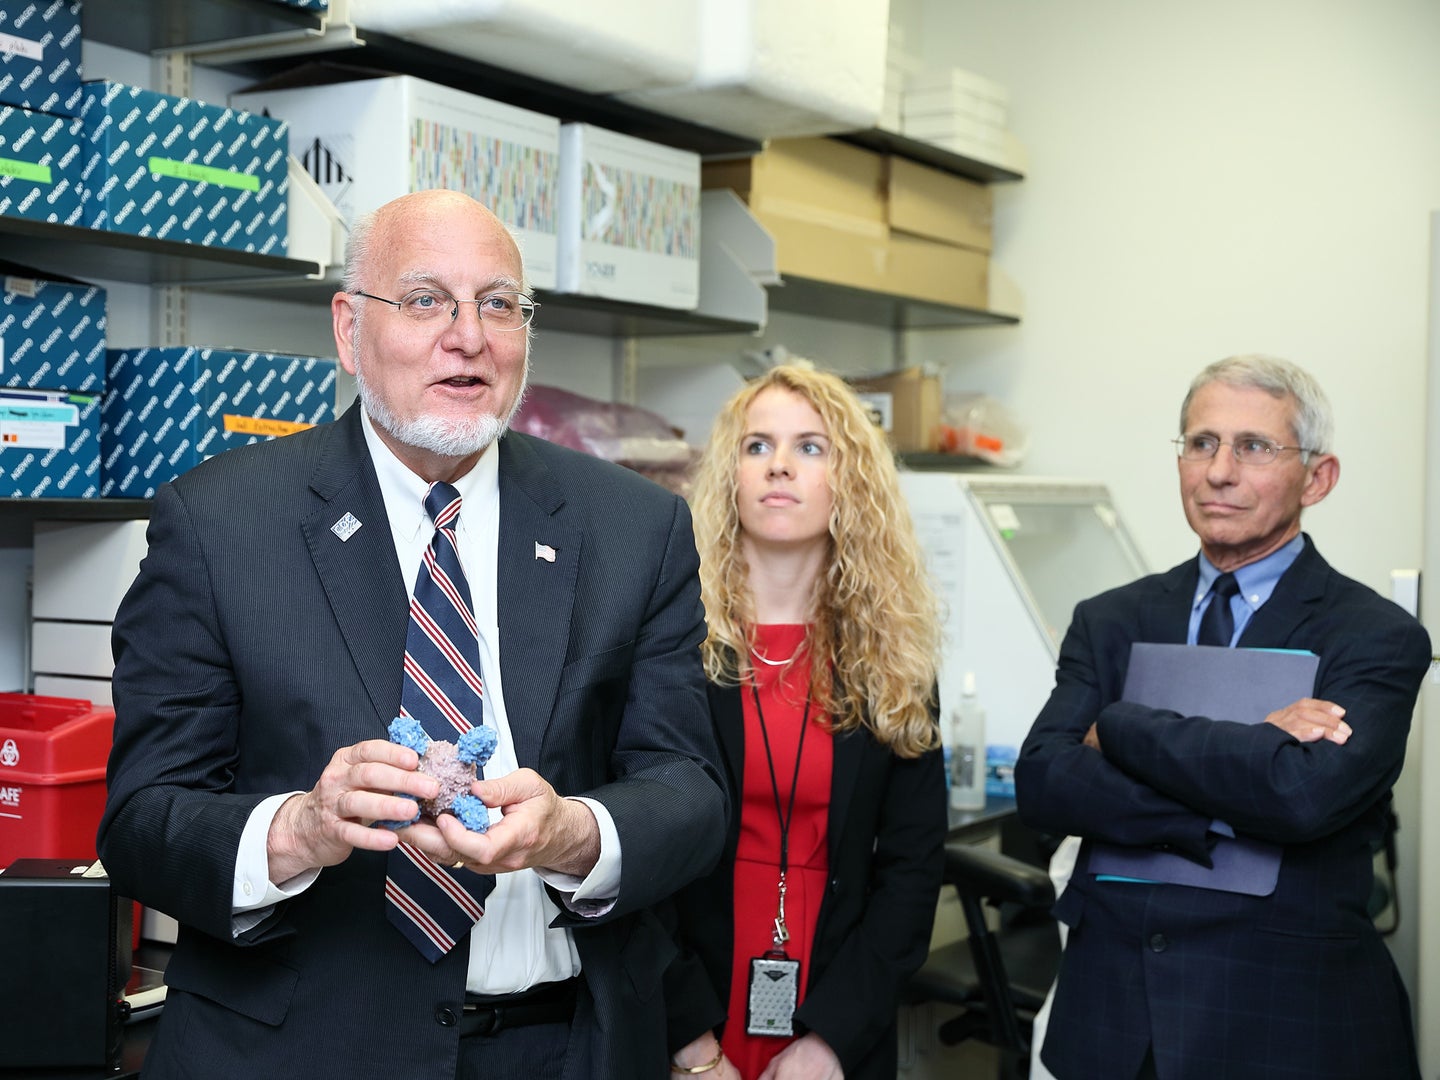 CDC Director Robert Redfield and National Institute of Allergy and Infectious Diseases Director Anthony Fauci in 2018